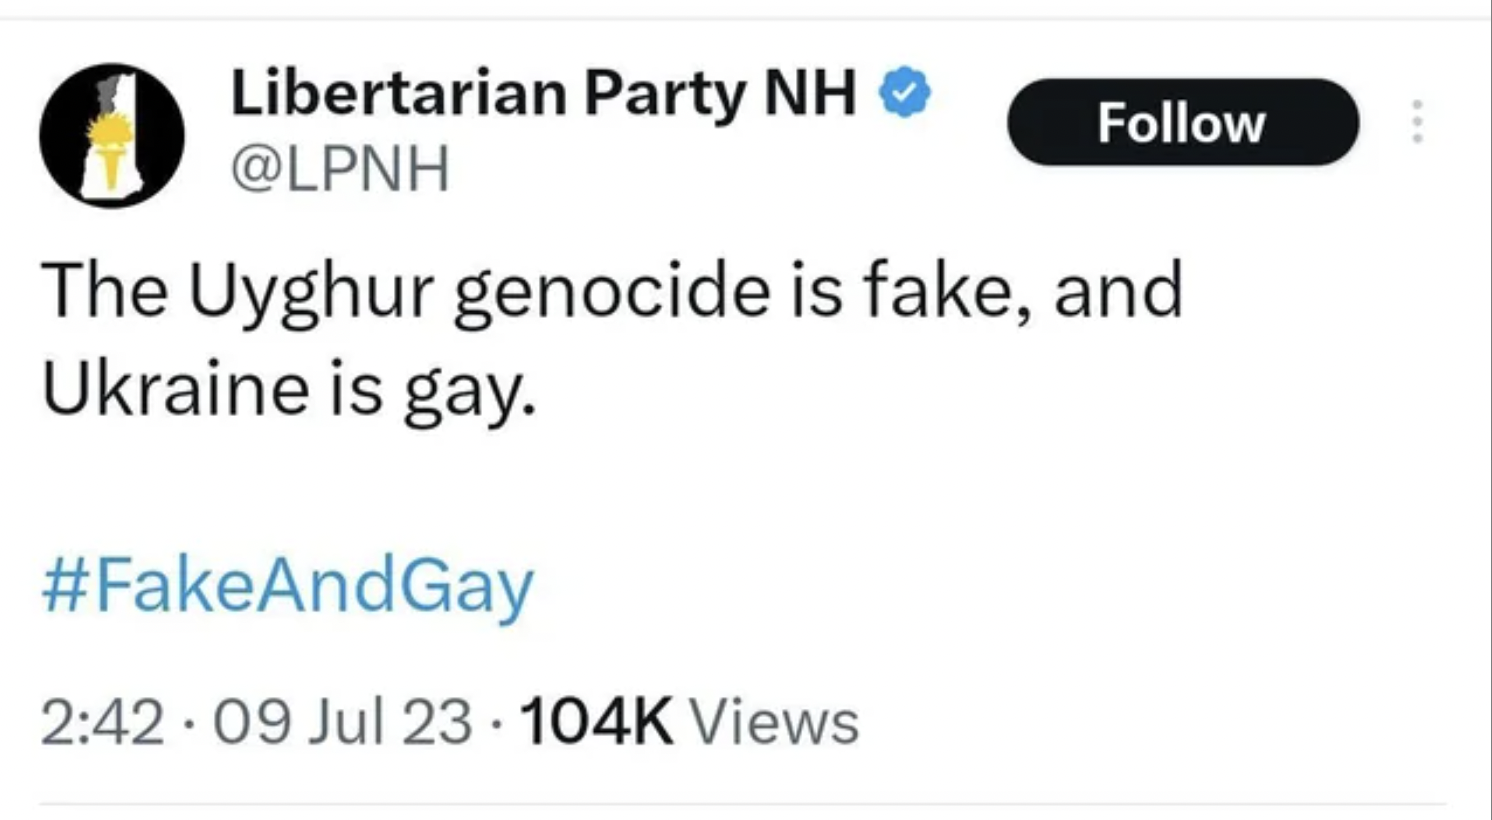 insane people on facebook - web page - Libertarian Party Nh The Uyghur genocide is fake, and Ukraine is gay. 09 Jul Views